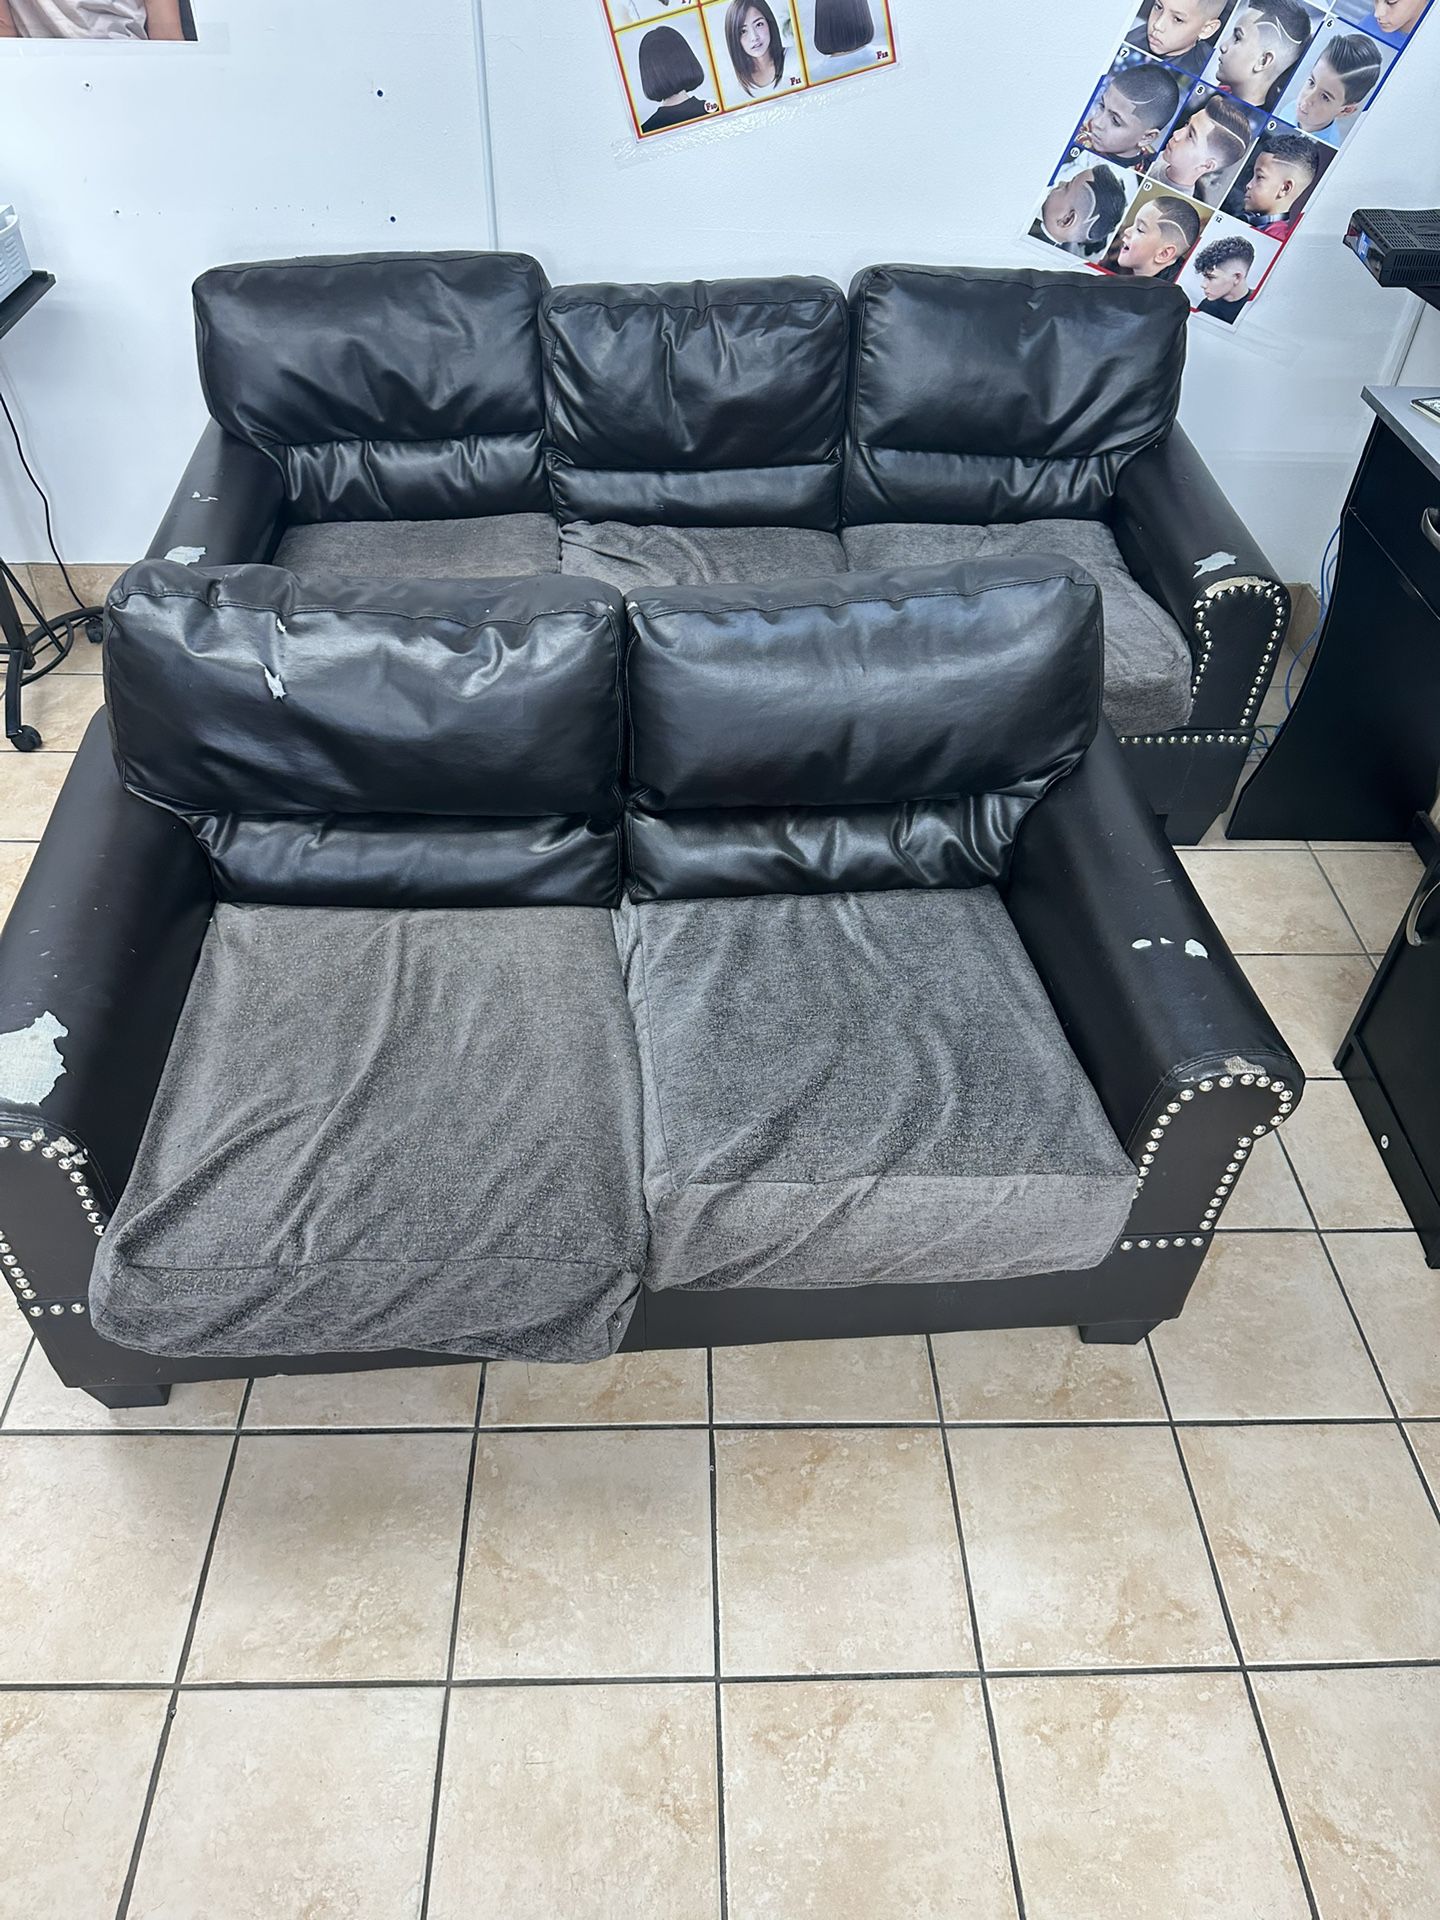 Sofa And Loveseat For Free